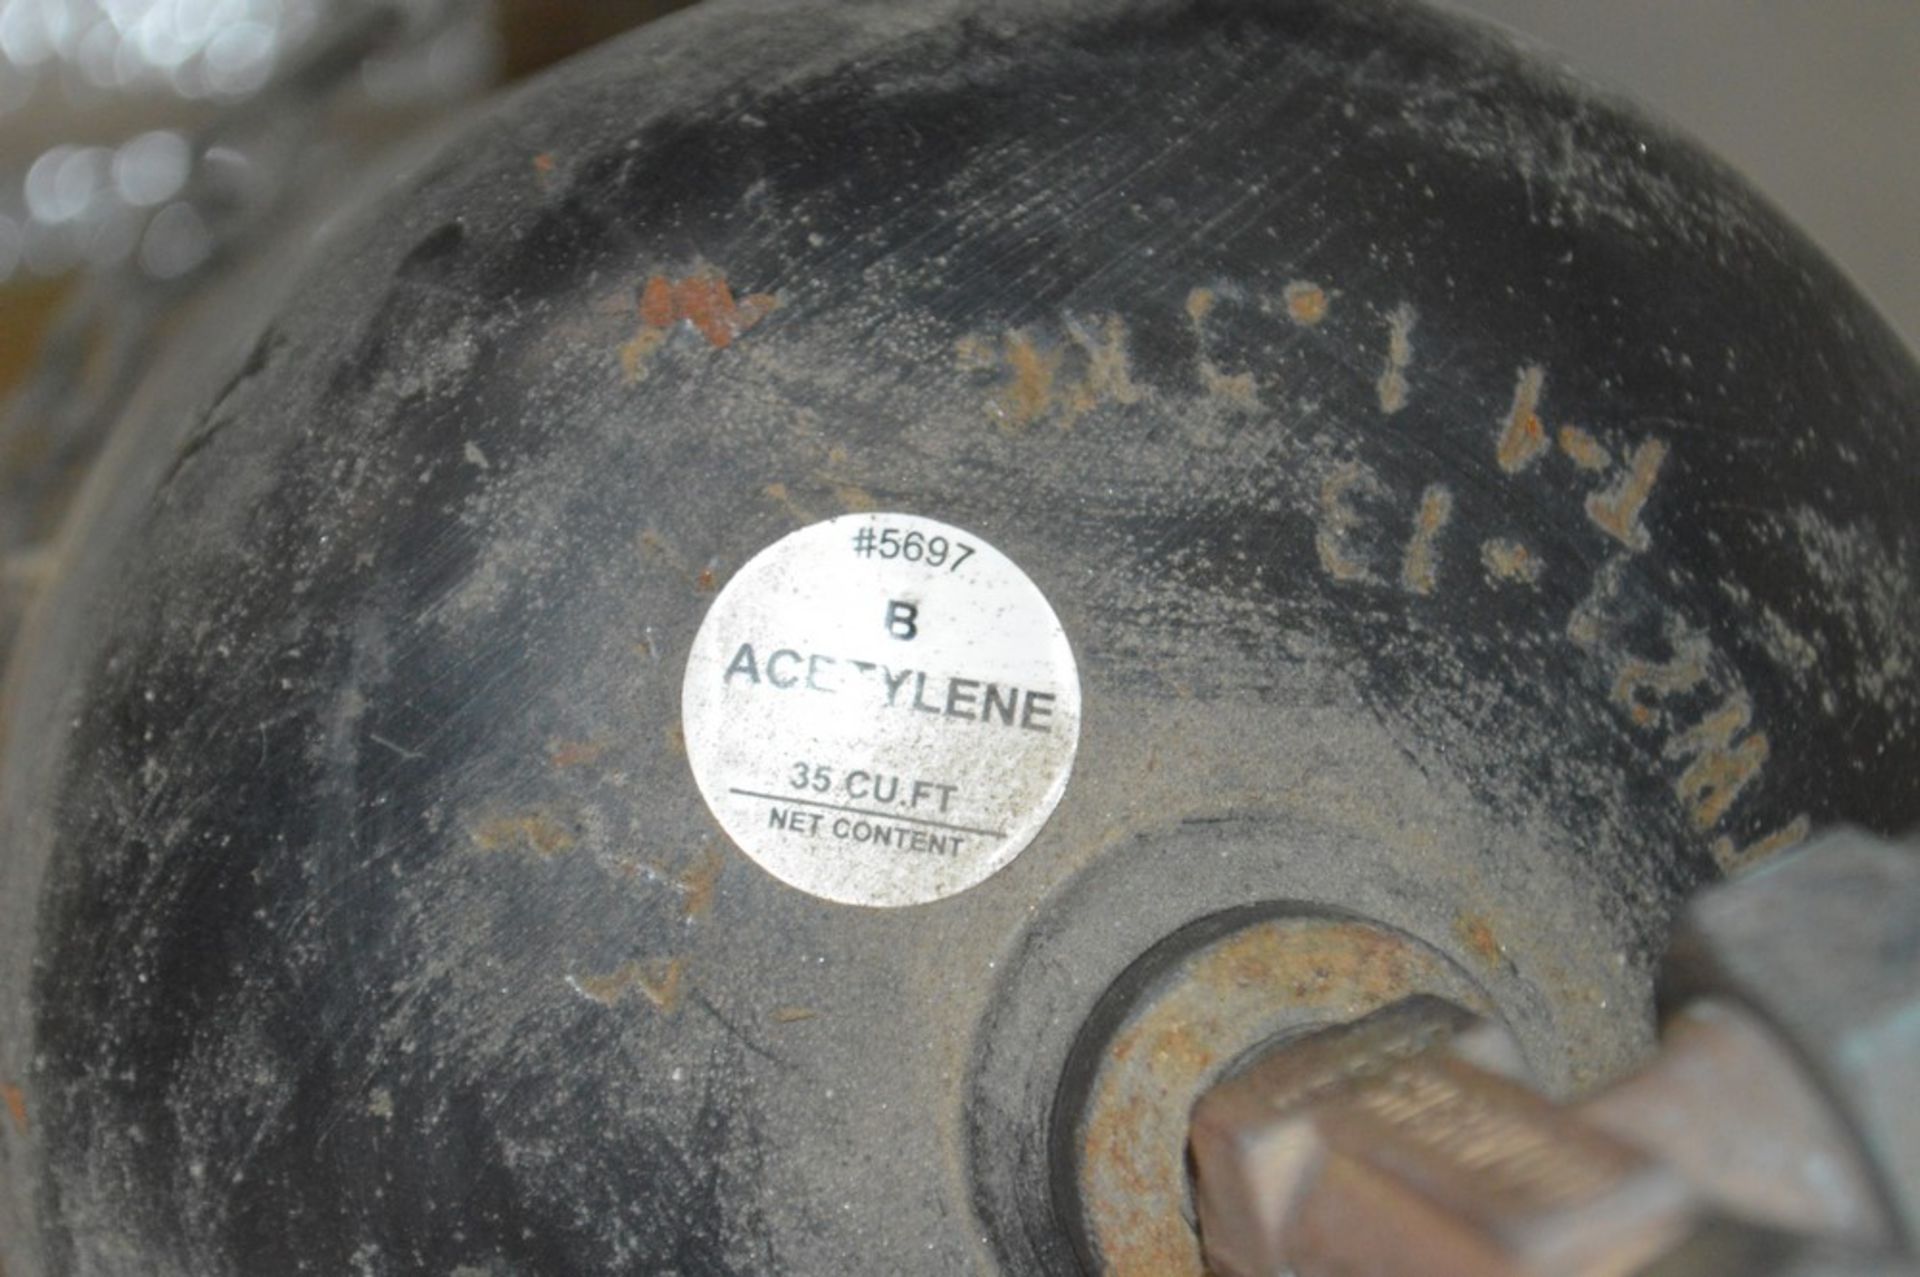 Acetylene torch on small rolling cart - Image 2 of 5